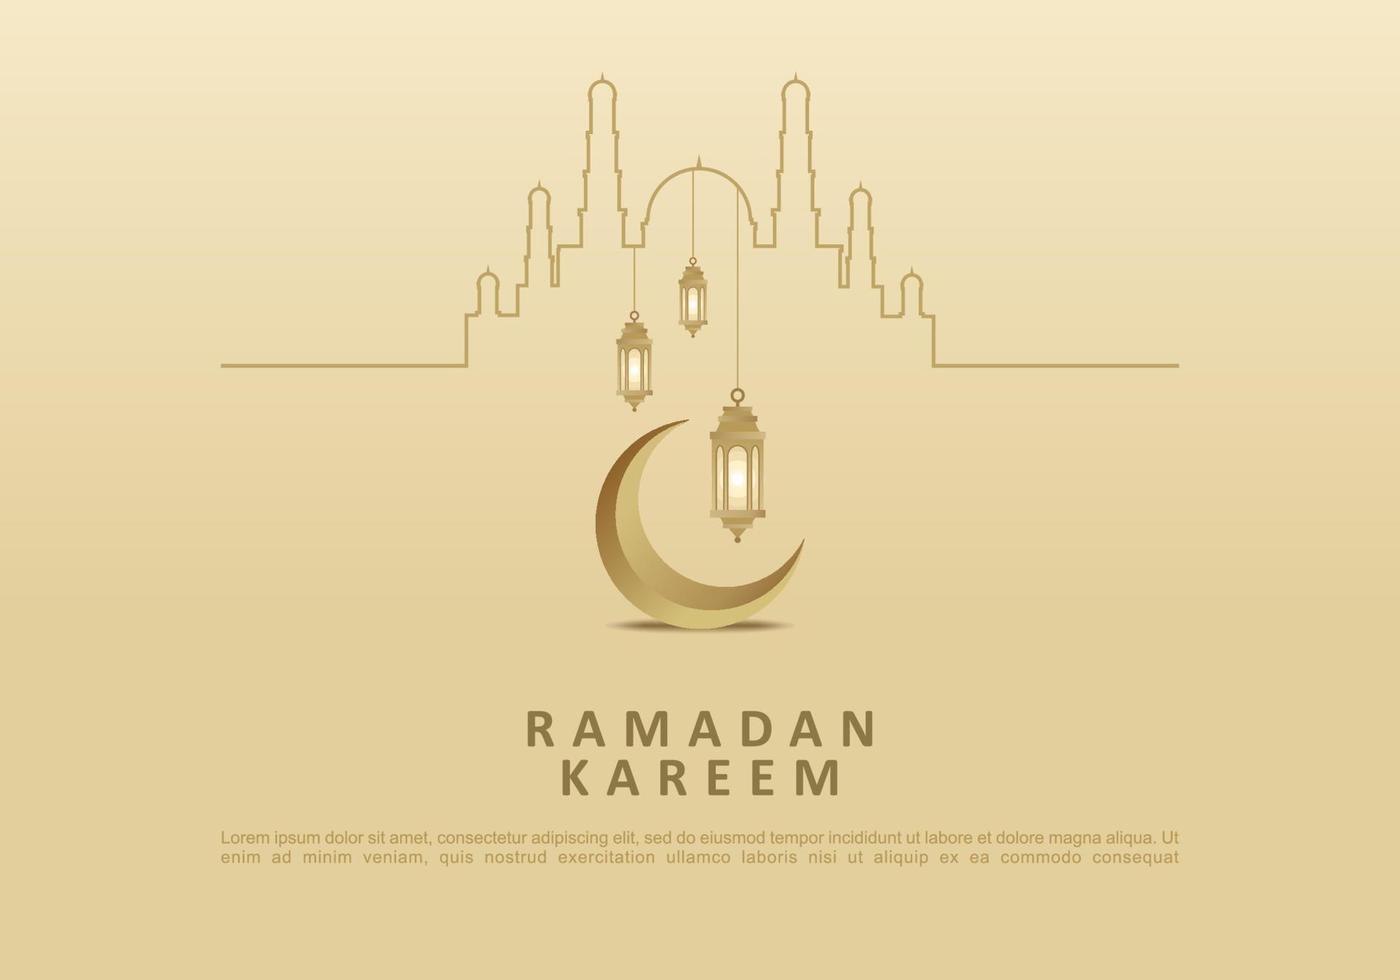 Ramadan kareem poster with one line mosque, moon and lantern vector